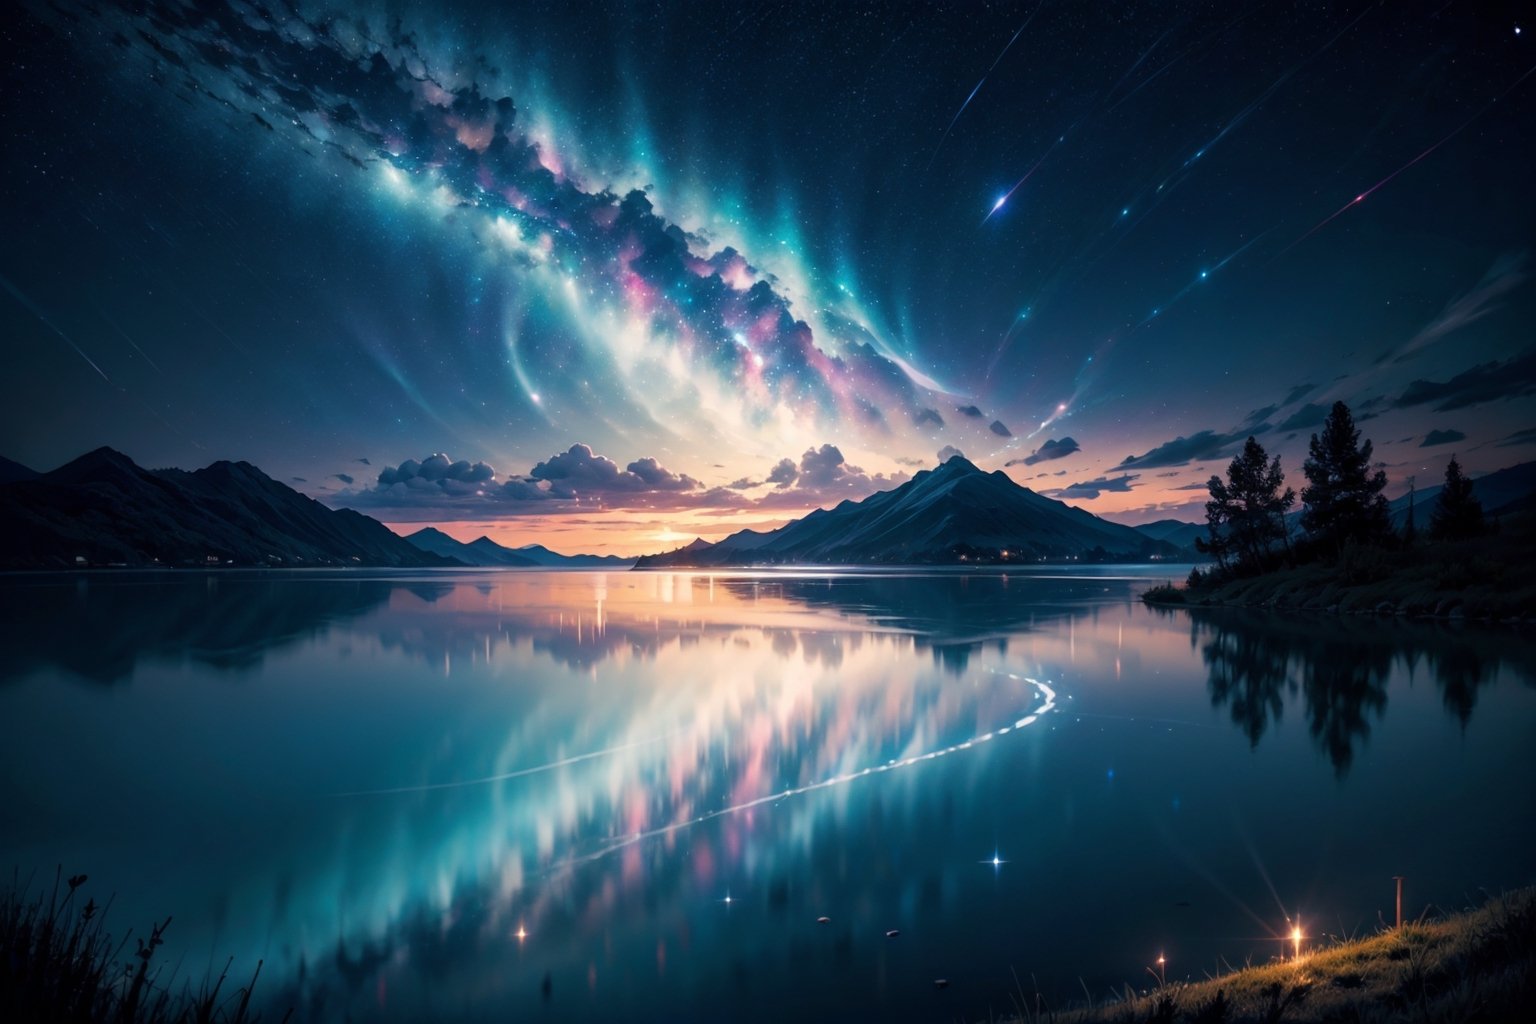 Beautifully wavy lake under the night sky, magical scenery in dreams, clouds and stars hanging in the sky, magic, beautiful scenery, illustrations, careful brush touch